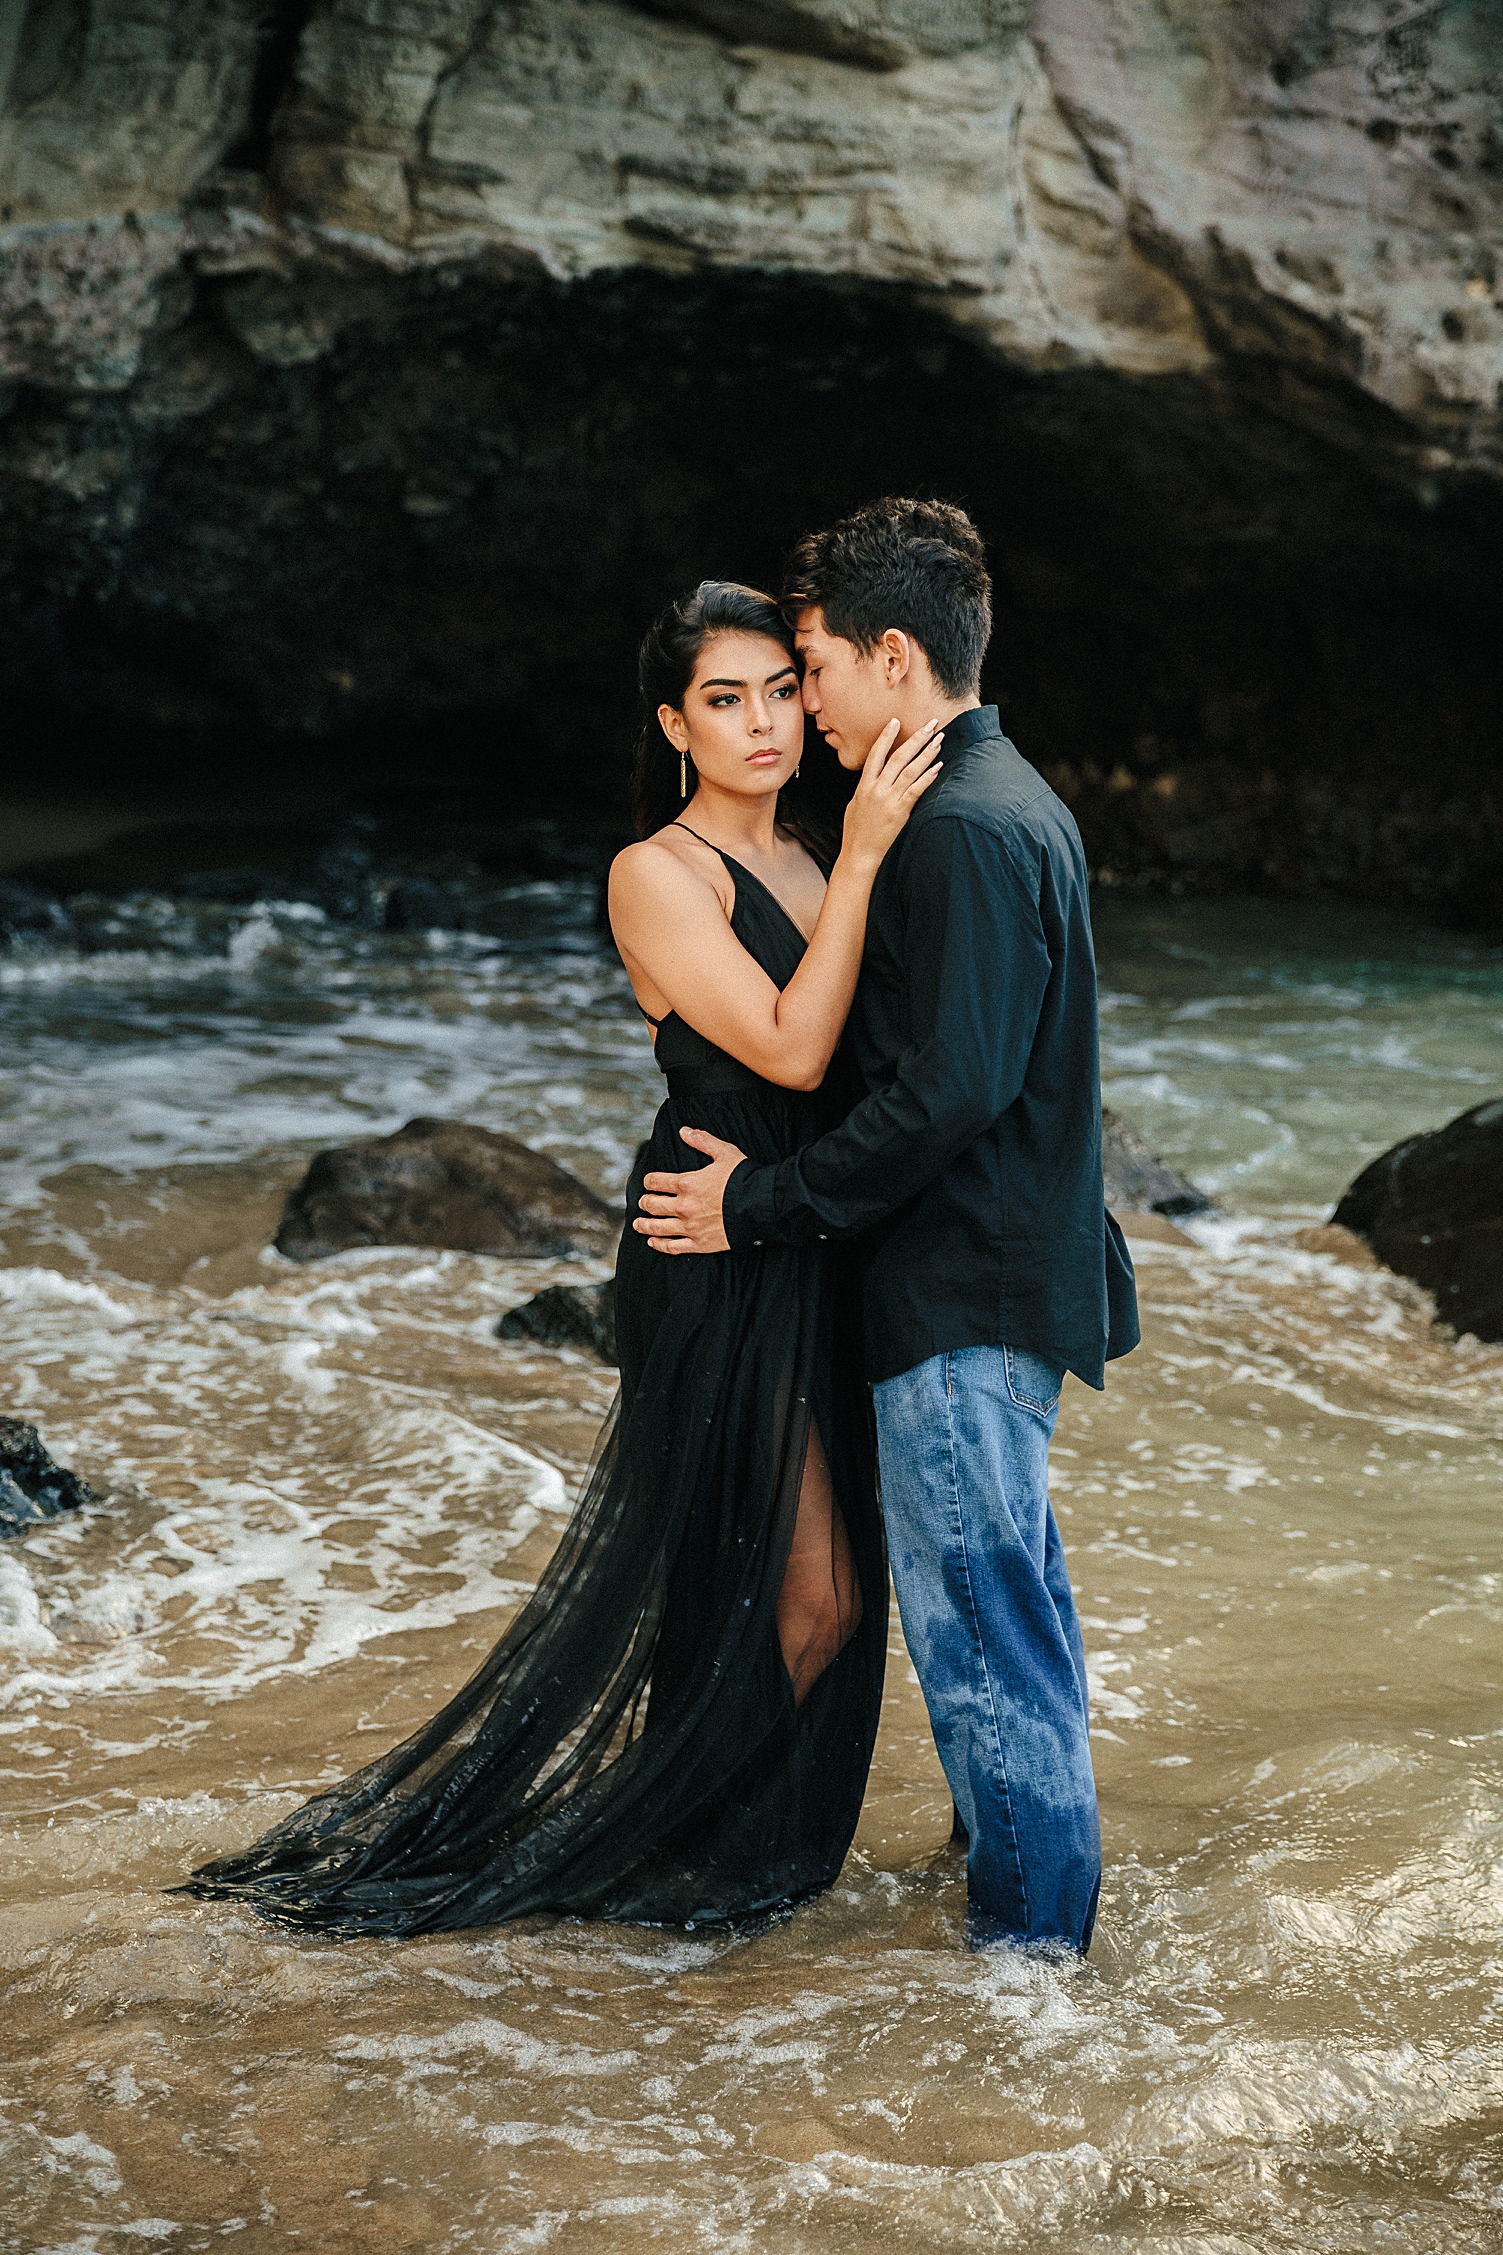 Couple dressed in black engagement on rocky beach